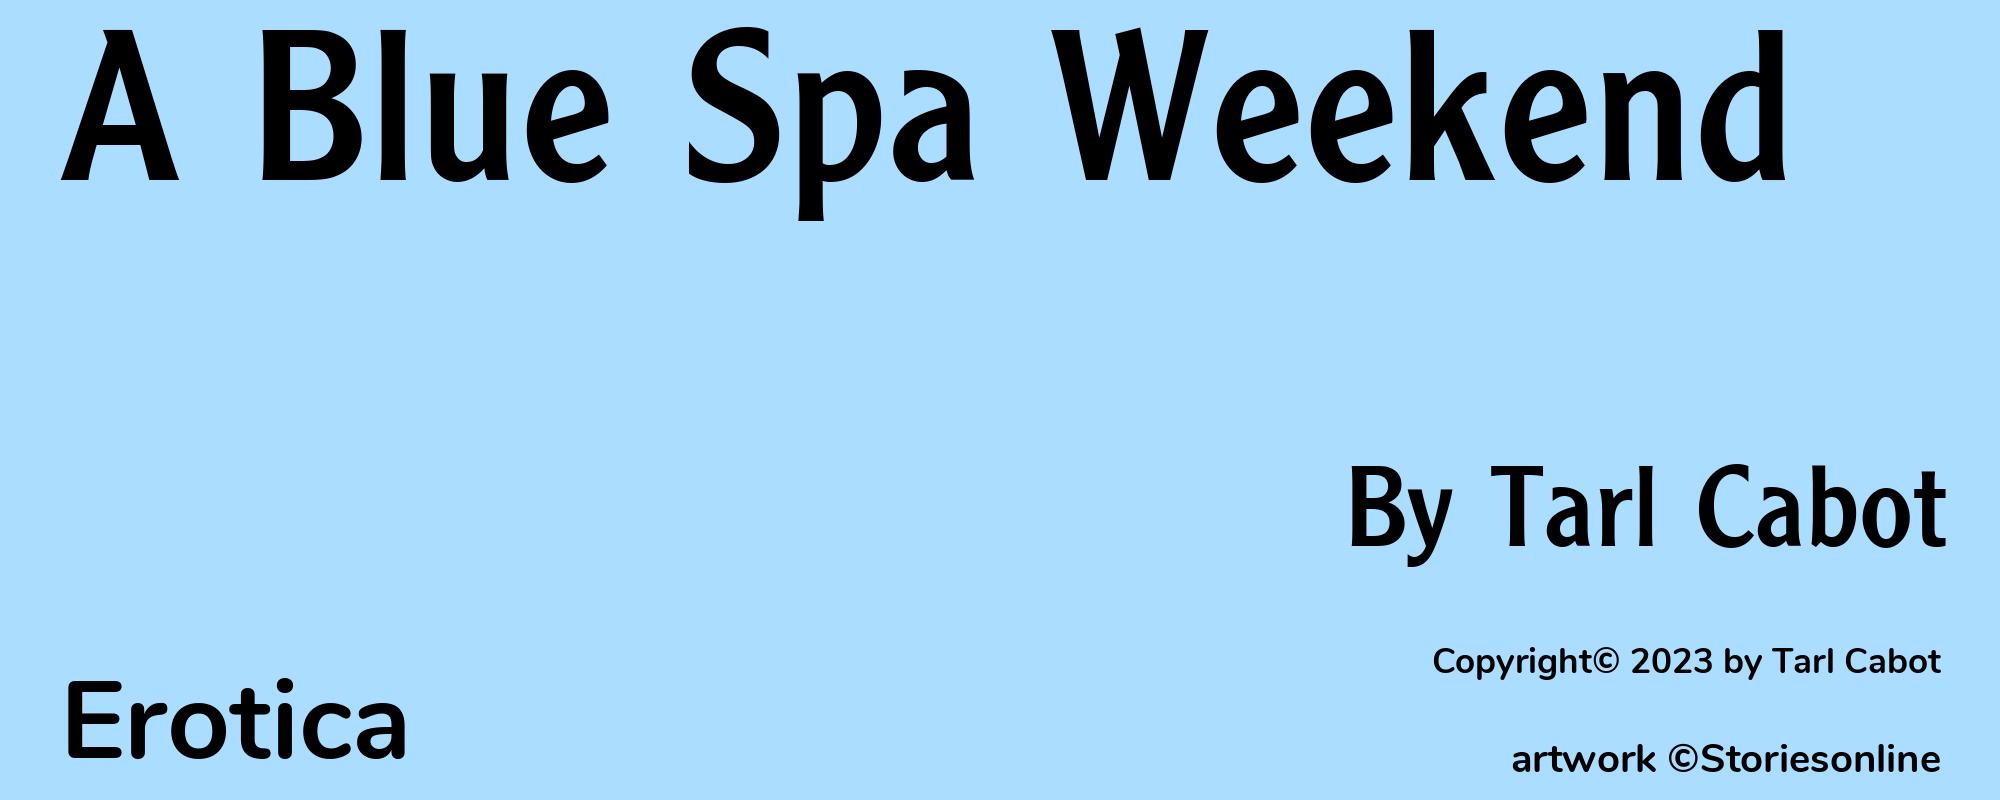 A Blue Spa Weekend  - Cover